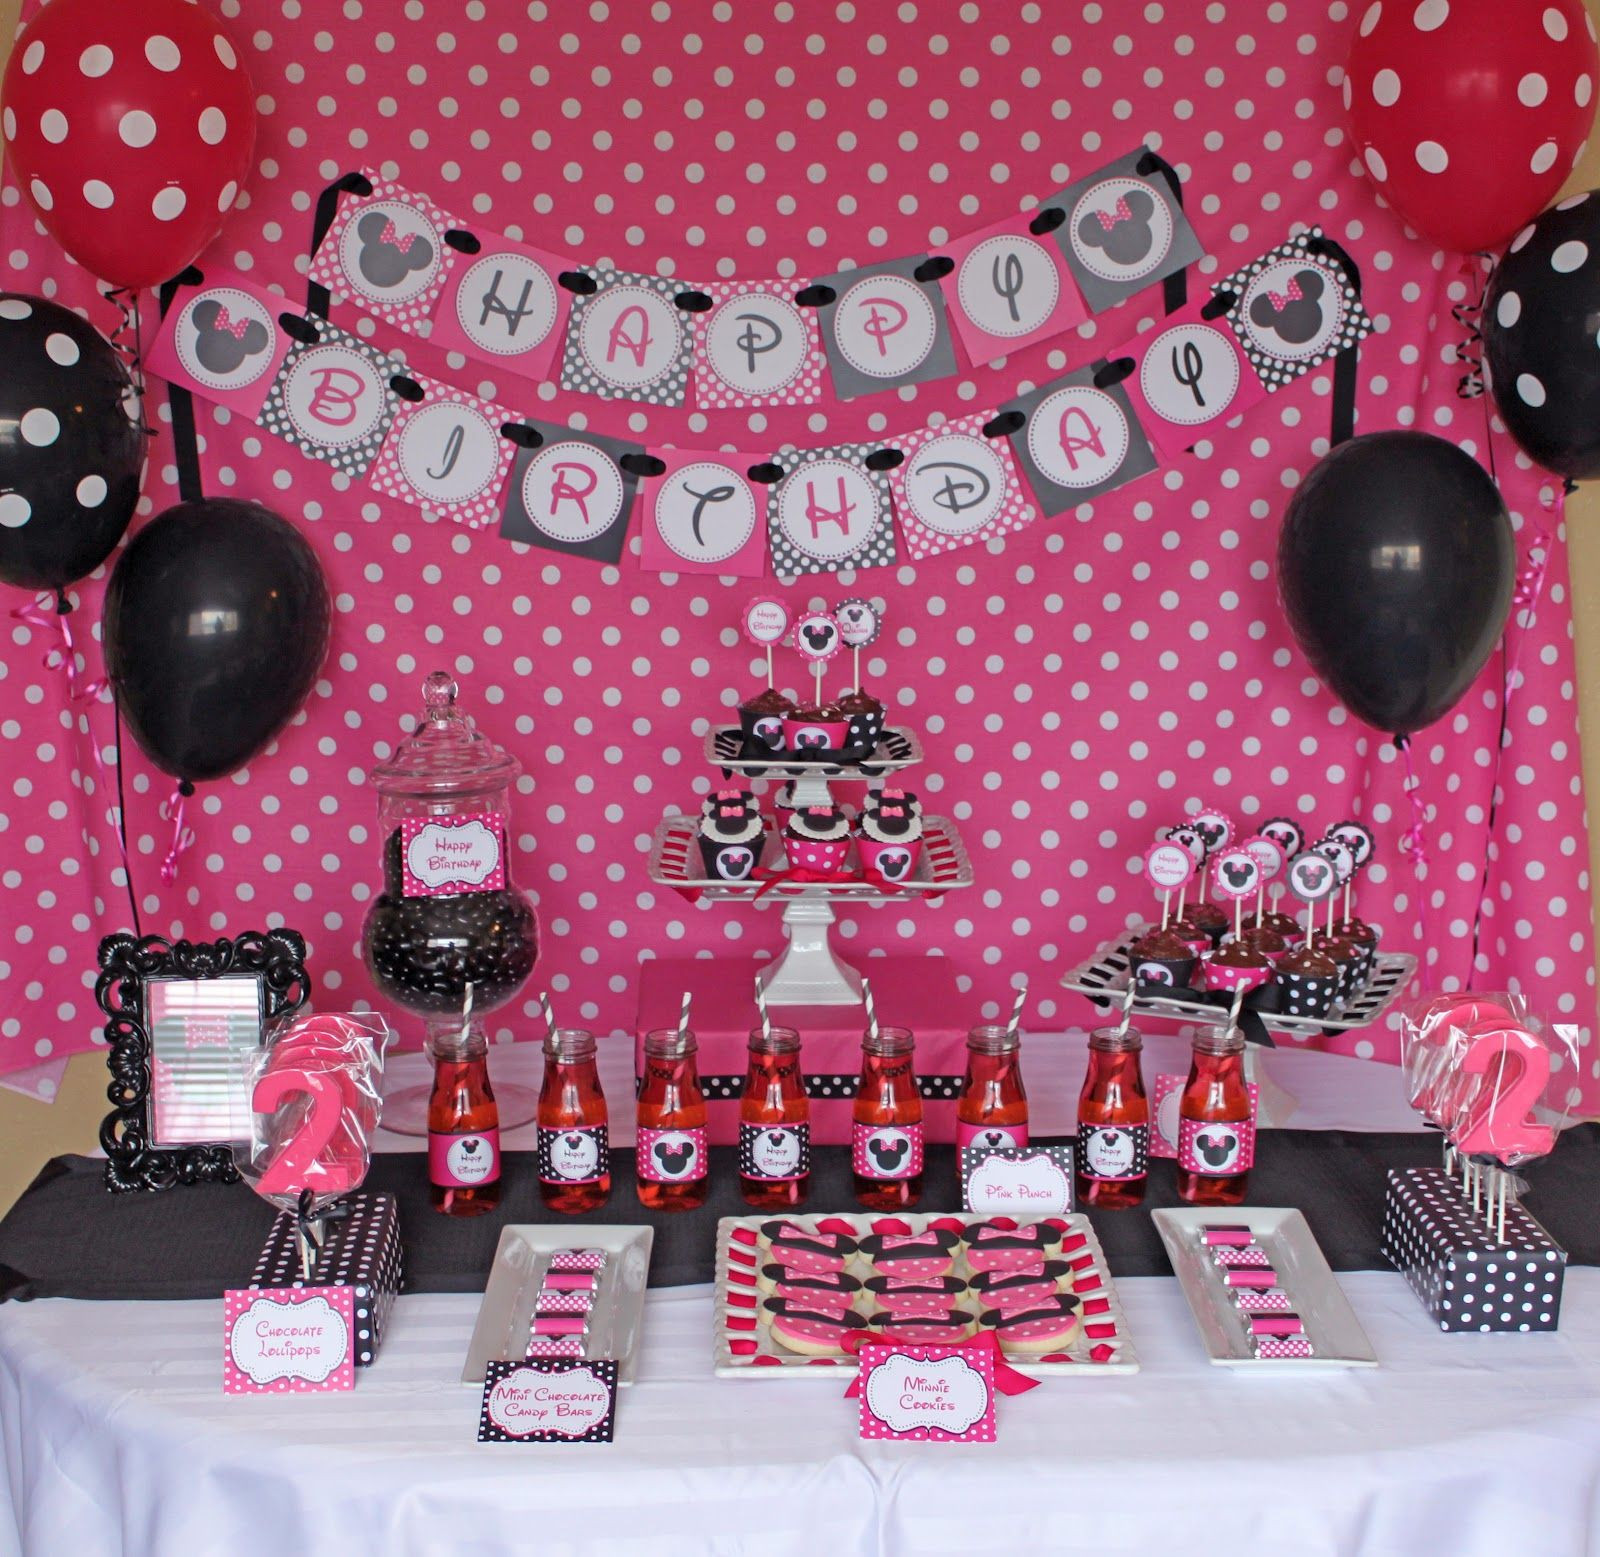 Minnie Mouse Ideas For 1st Birthday Party
 Cupcake Express Minnie Mouse Birthday Party